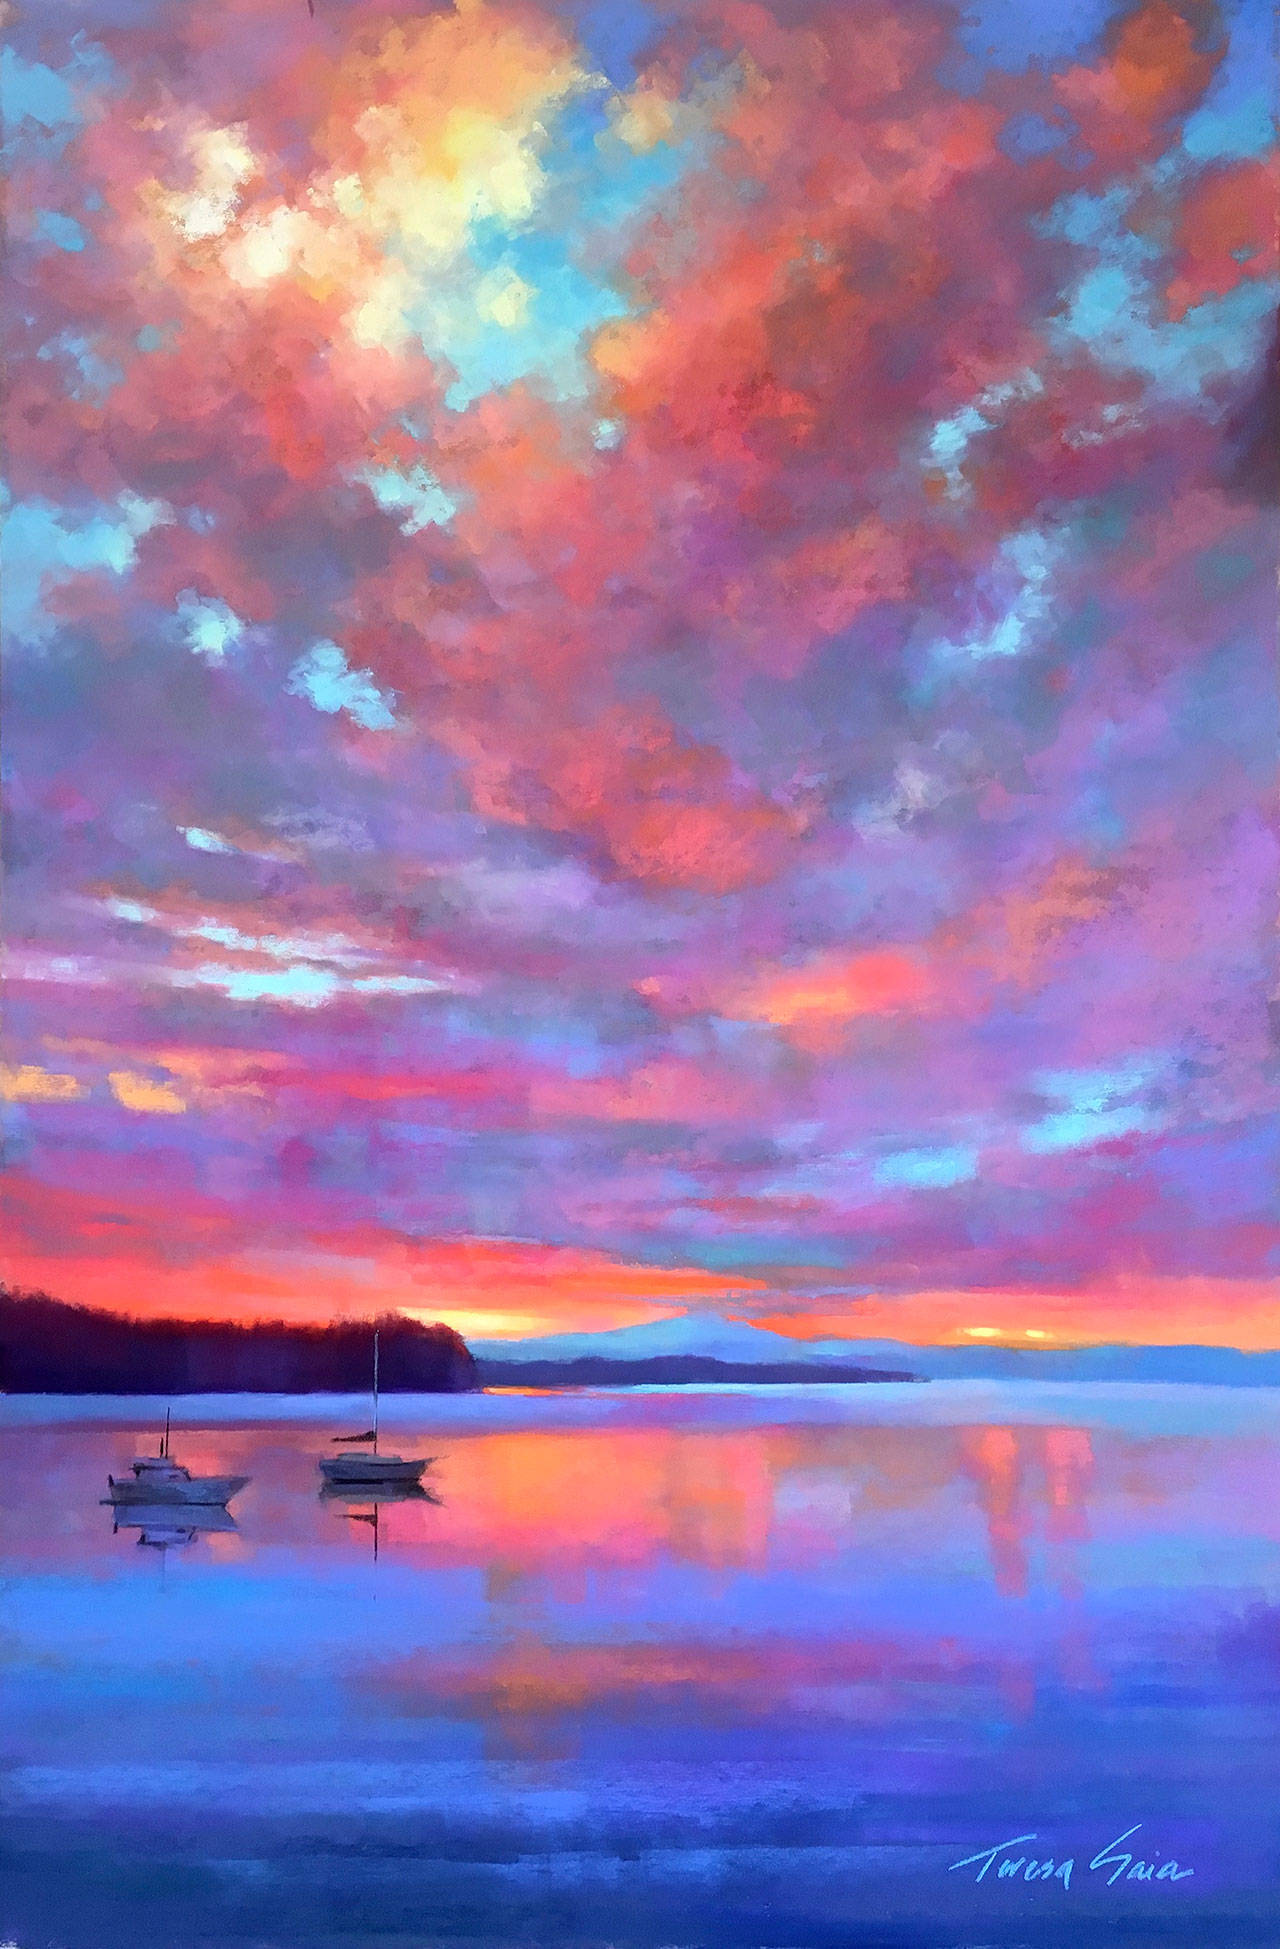 “Dawn on Penn Cove II,”pastel by Teresa Saia, the artist featured this month at Rob Schouten Gallery.